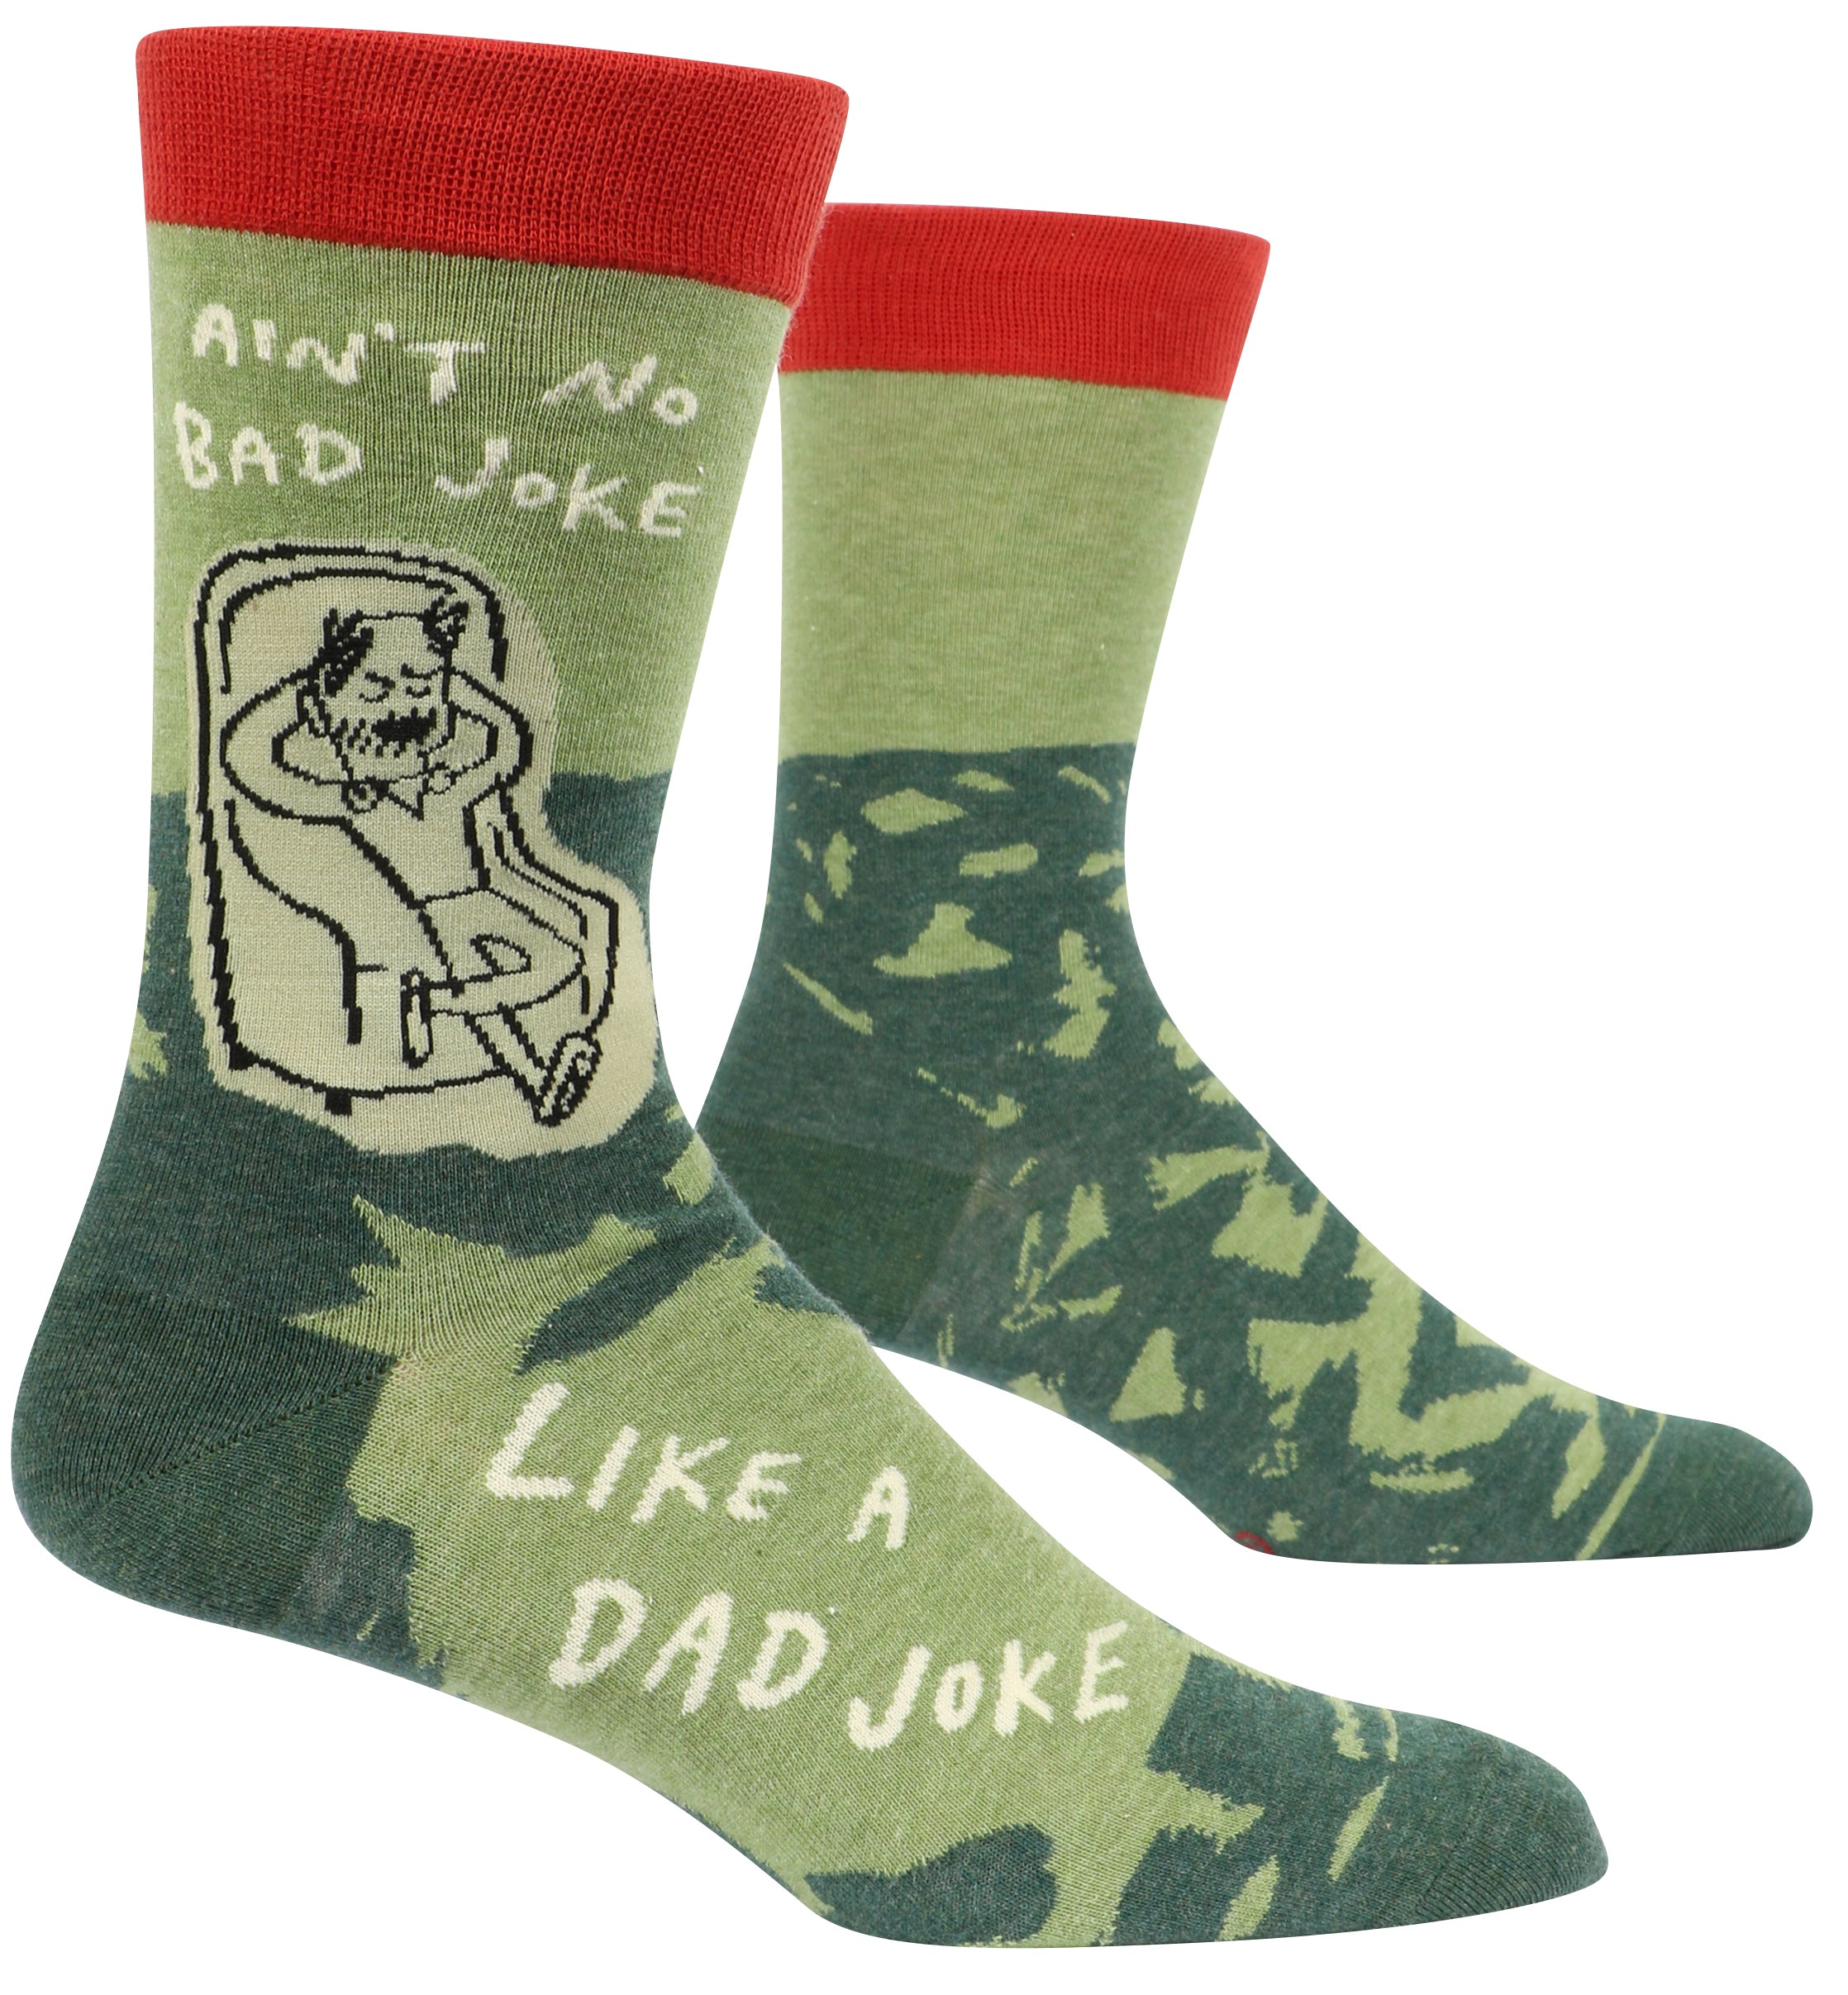 green socks with red ankle stripe picture of a dad sitting in chair and it says ain't no bad joke like a dad joke